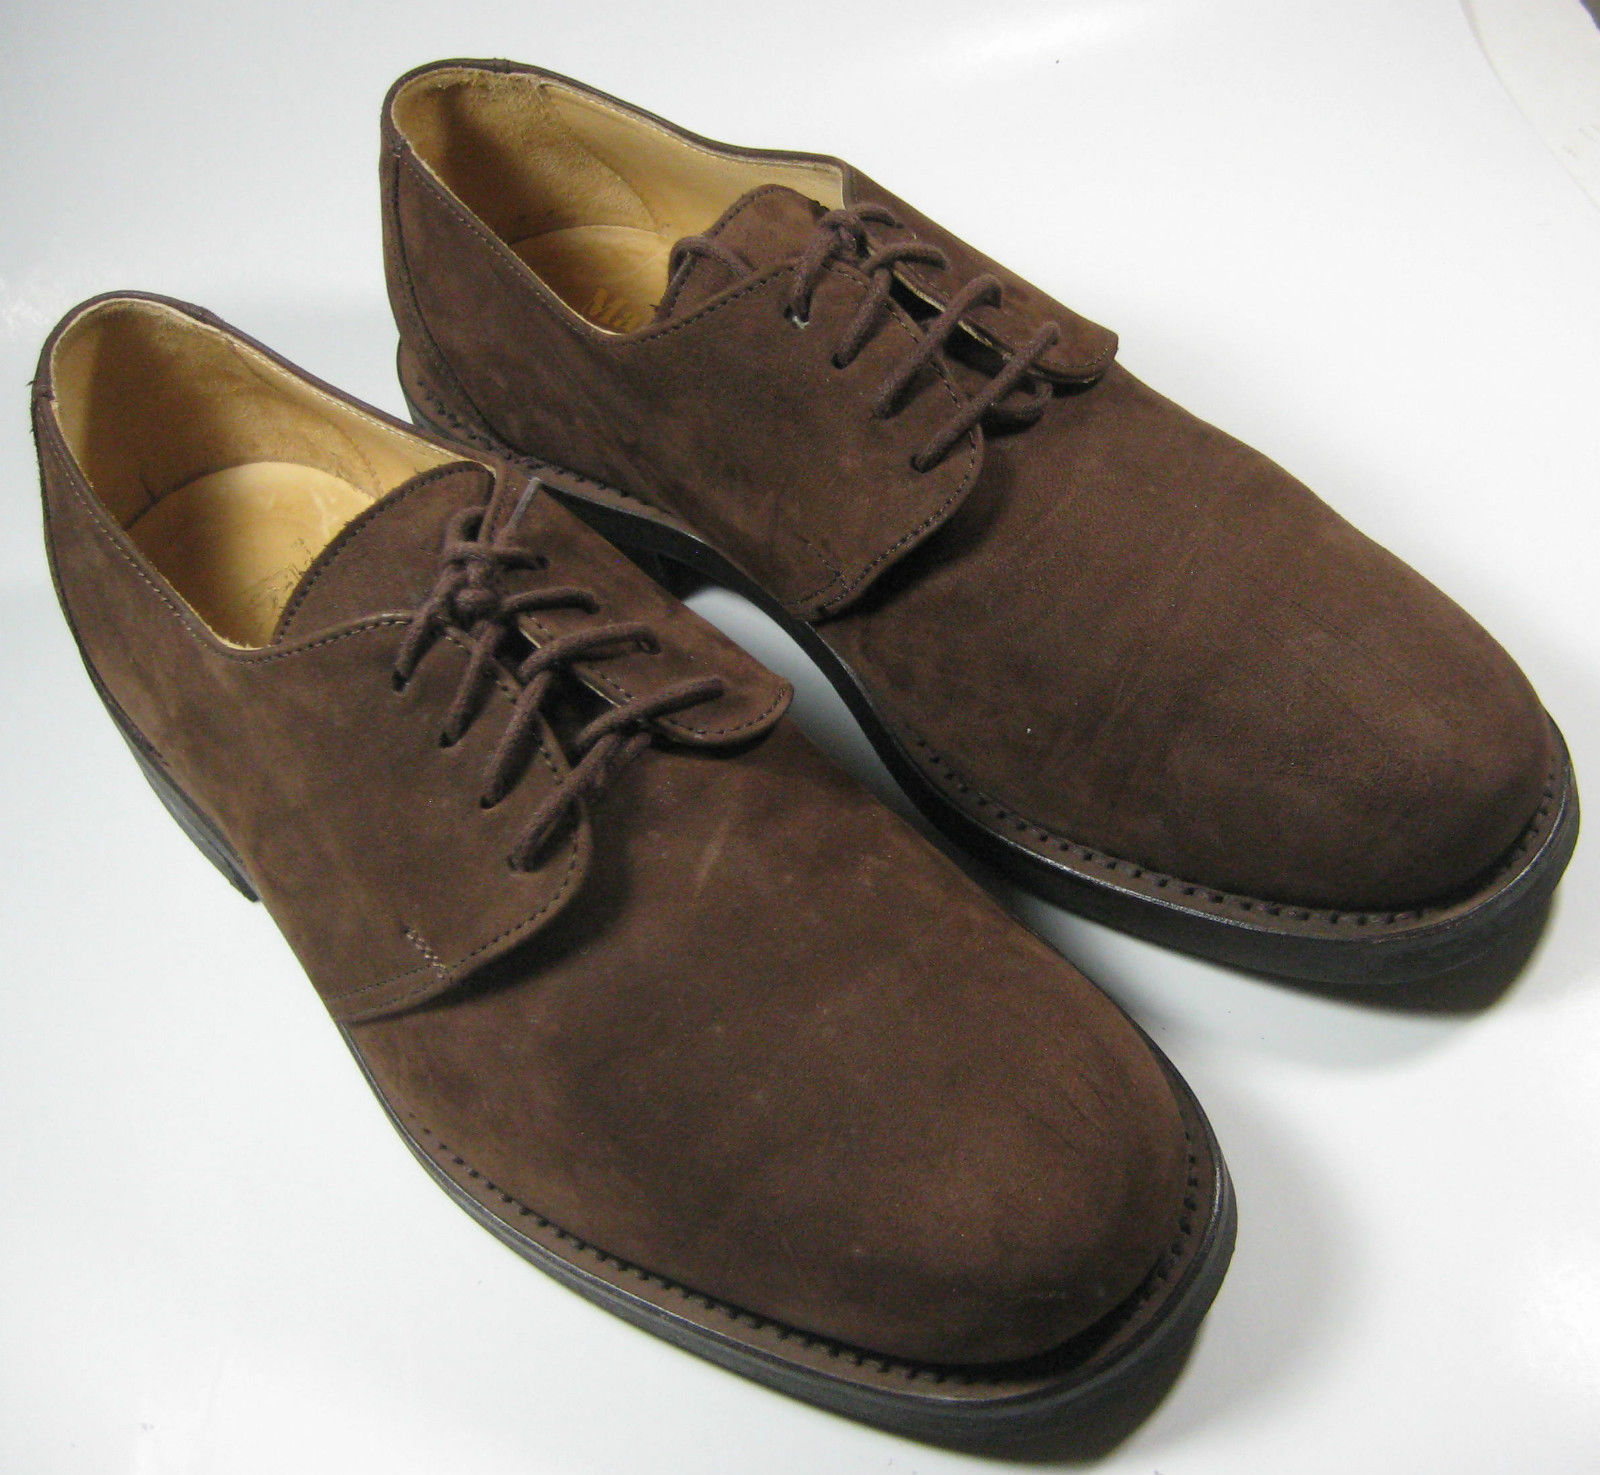 MANFIELD US 8.5 EU 42 Brown Suede Oxford Excellent Strong Durable ...